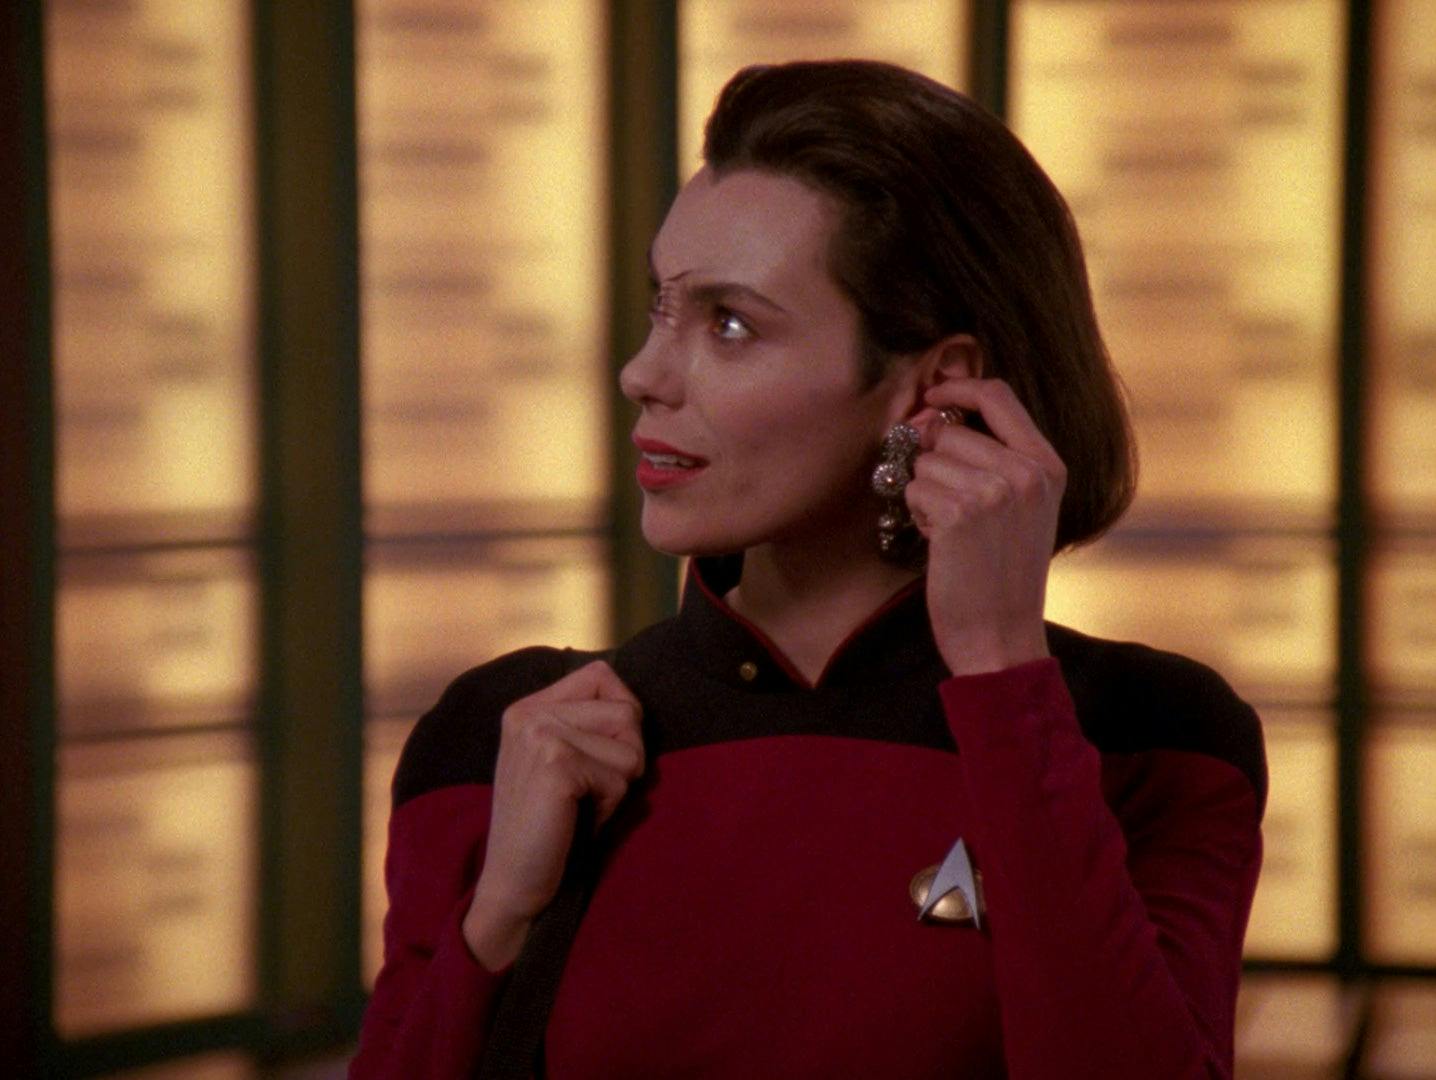 Ensign Ro Laren touches her ear to remove her Bajoran earring